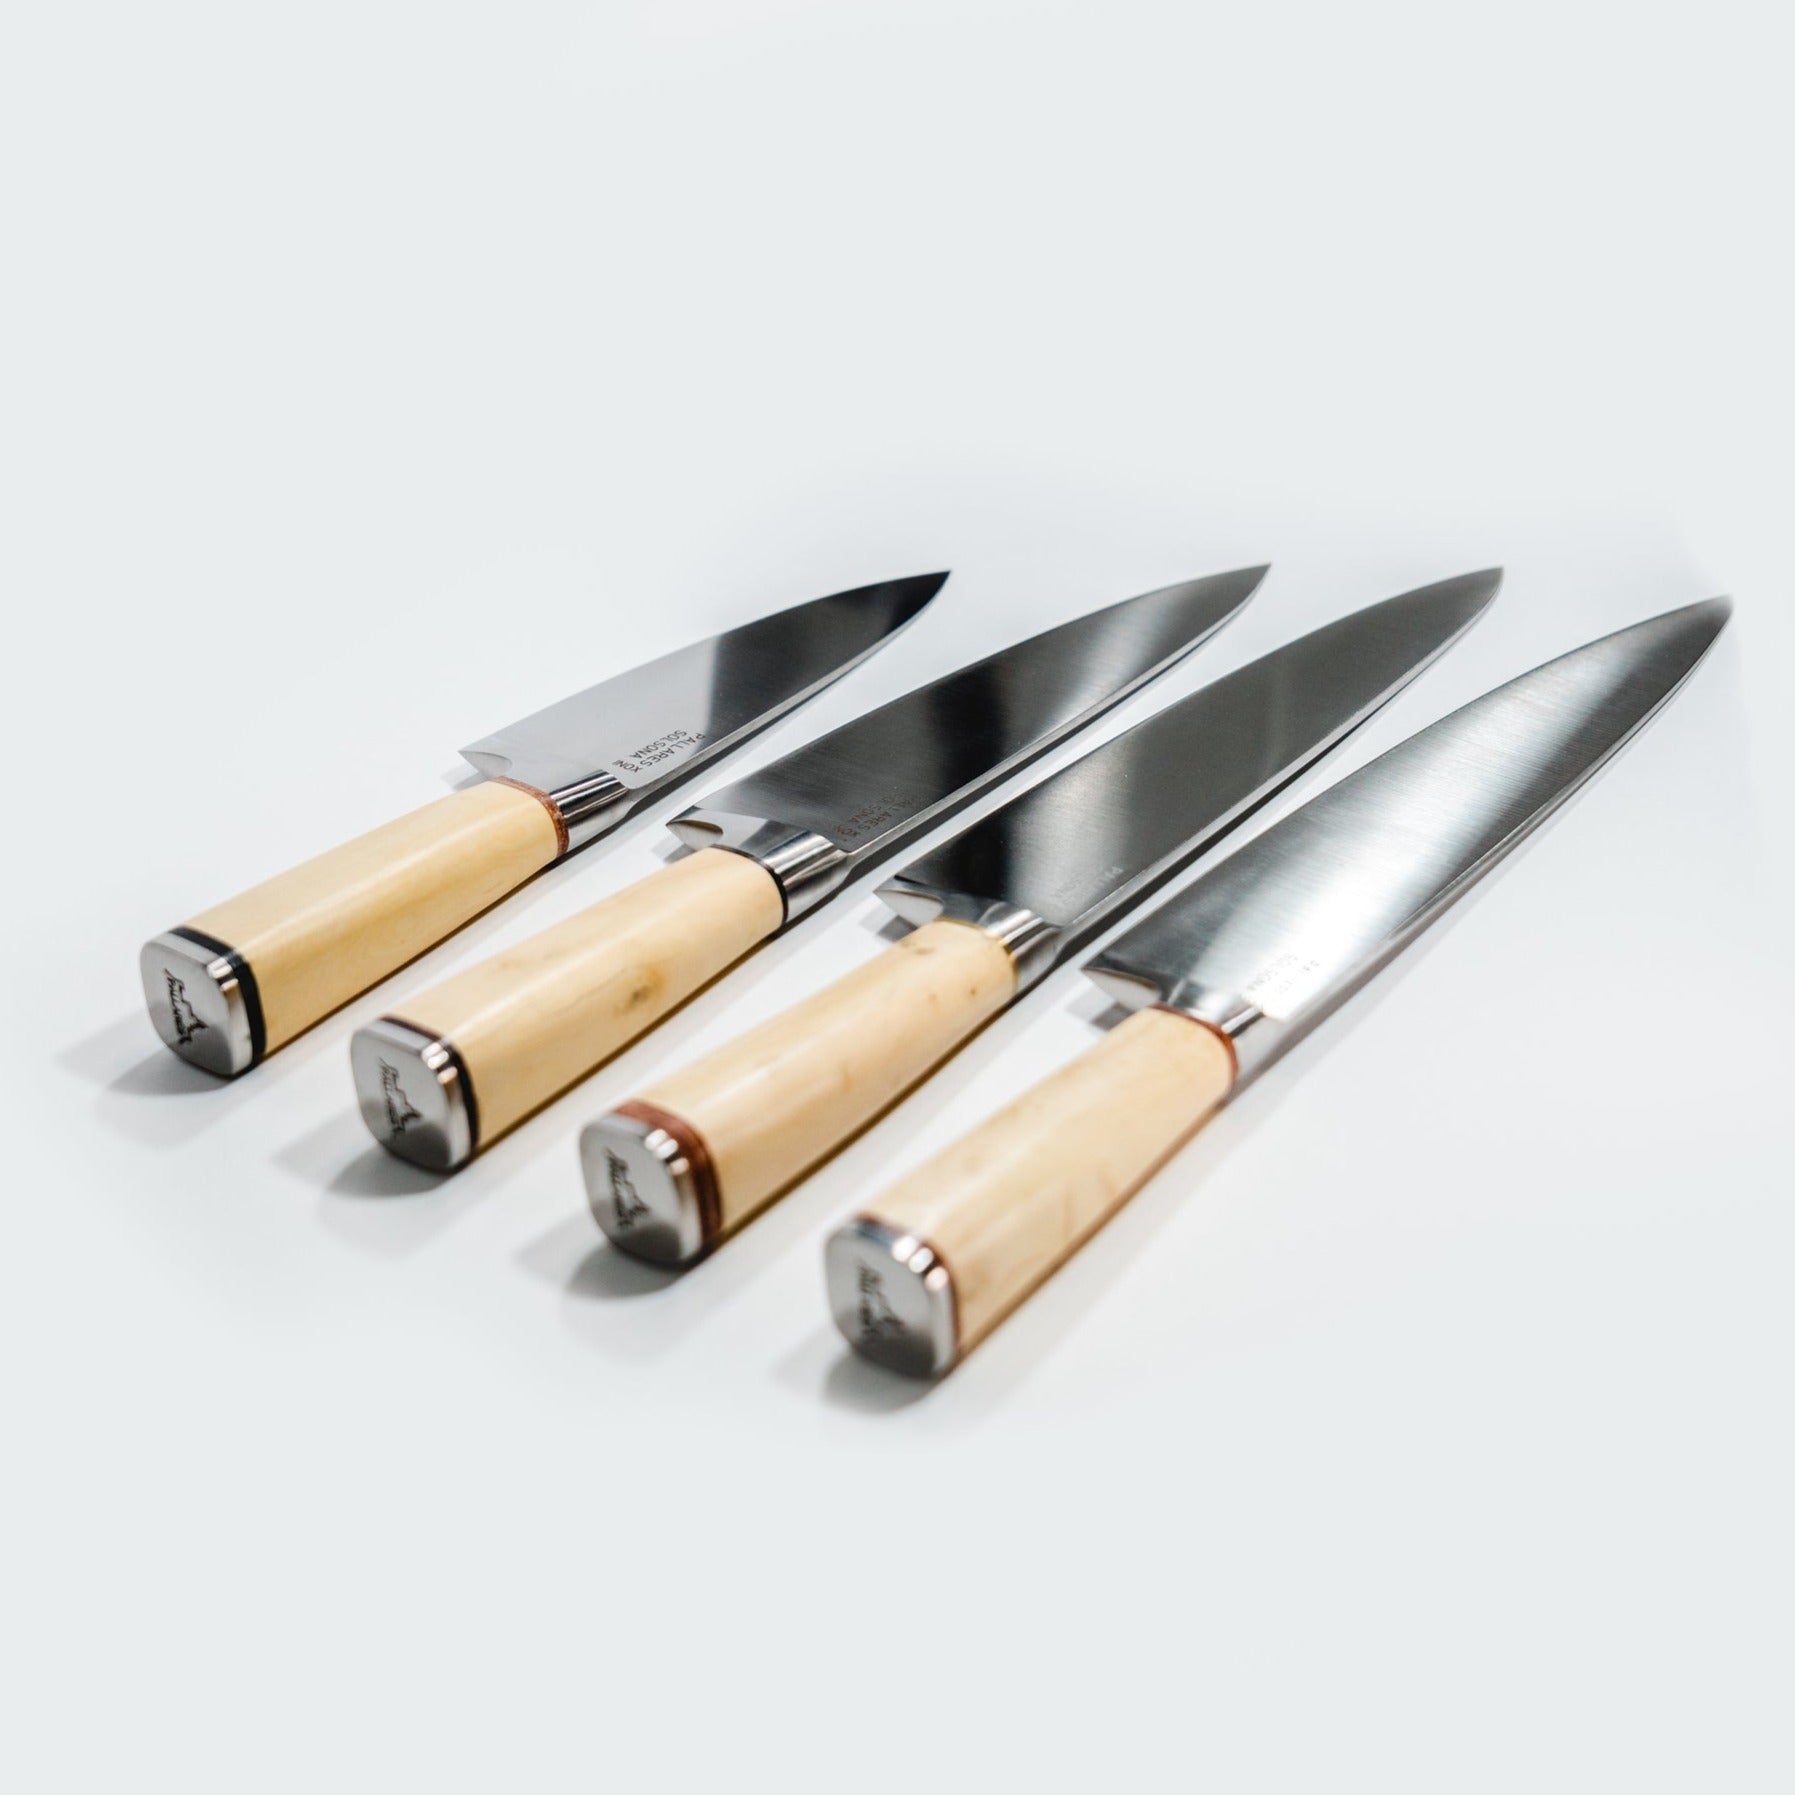 PALLARES SOLSONA KNIFE - STAINLESS STEEL - projectcurate